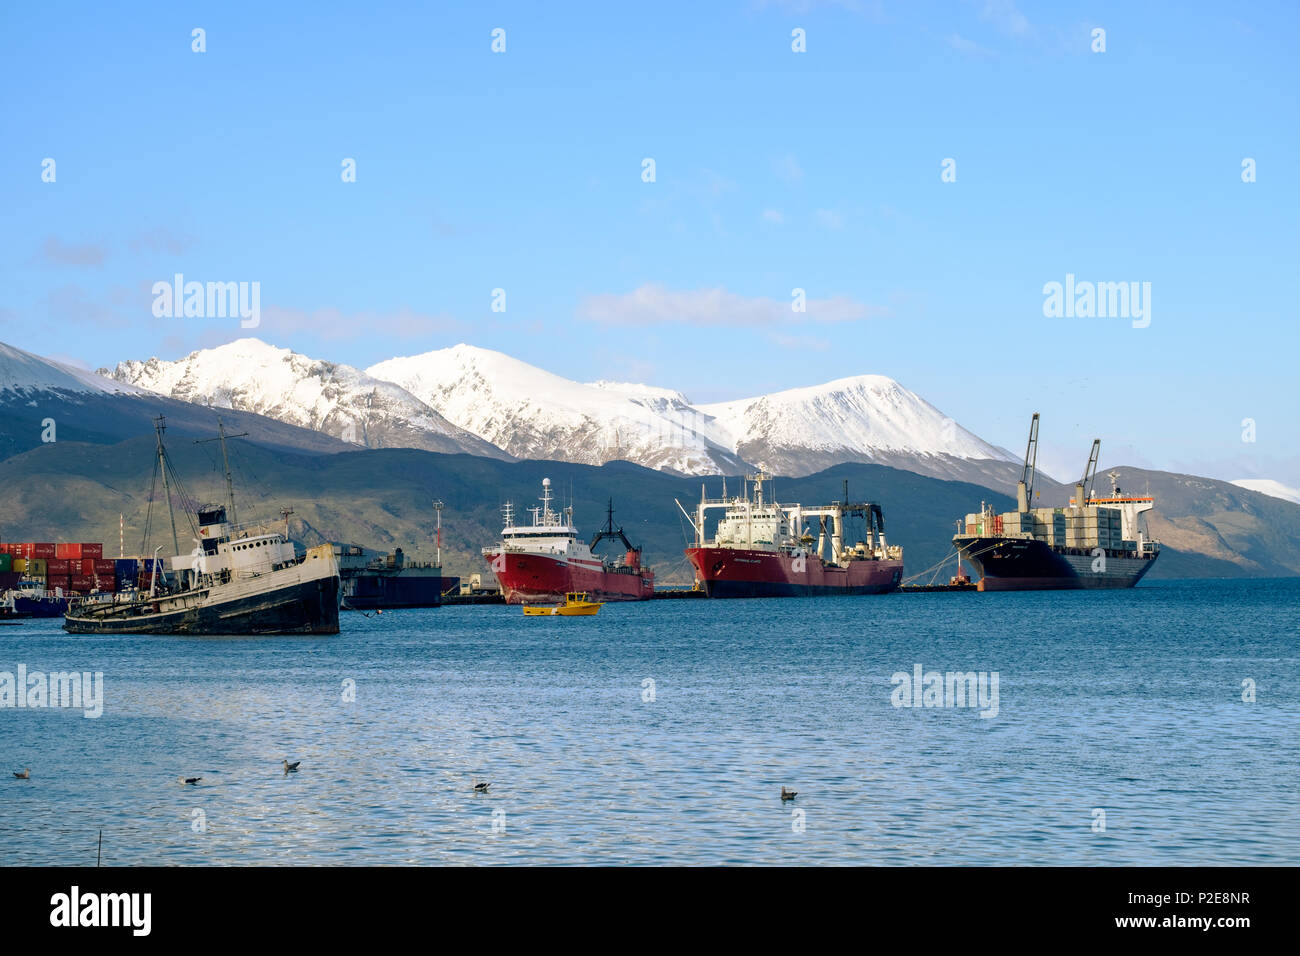 The Saint-Christopher, an old boat, lies in the bay of Ushuaia. Behind that are a few container ships who show some small harbor activity. Stock Photo